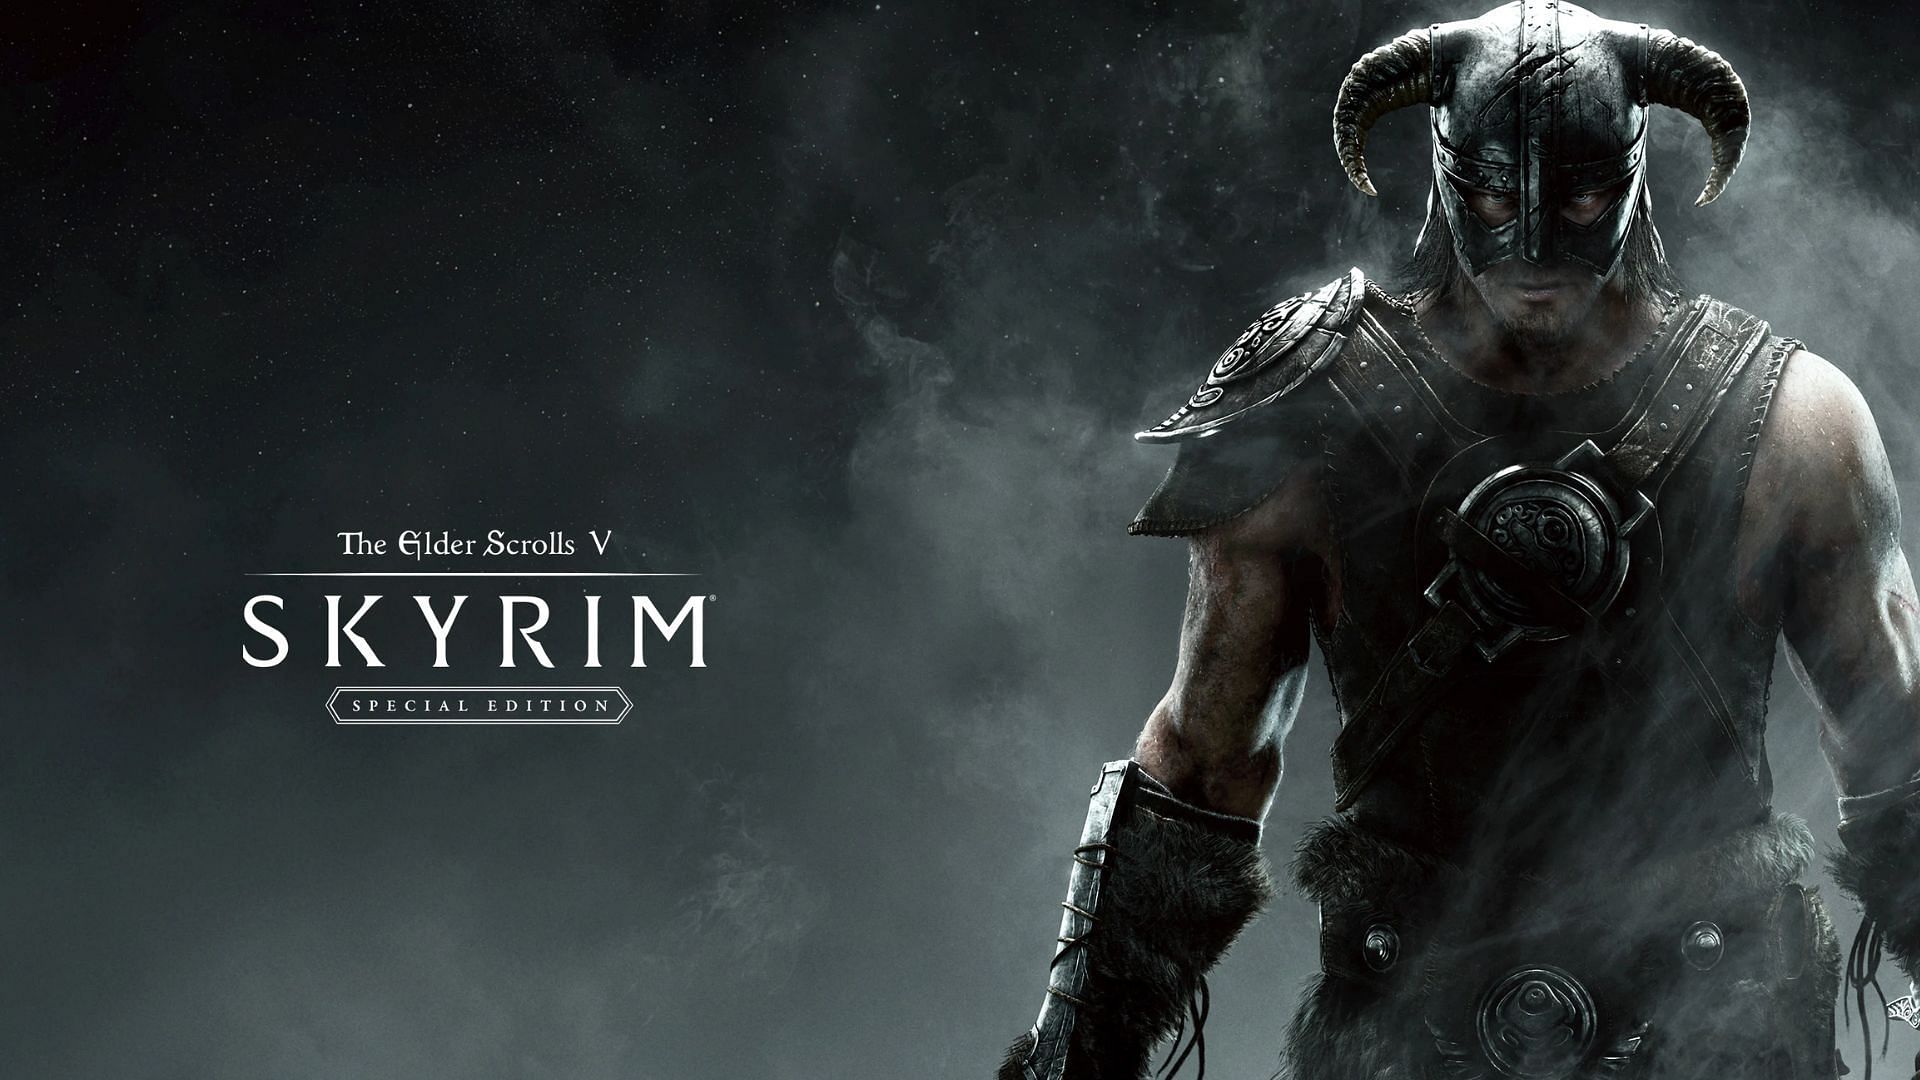 The Elder Scrolls V: Skyrim is an Action Role Playing Game (Image via Bethesda Game Studios)